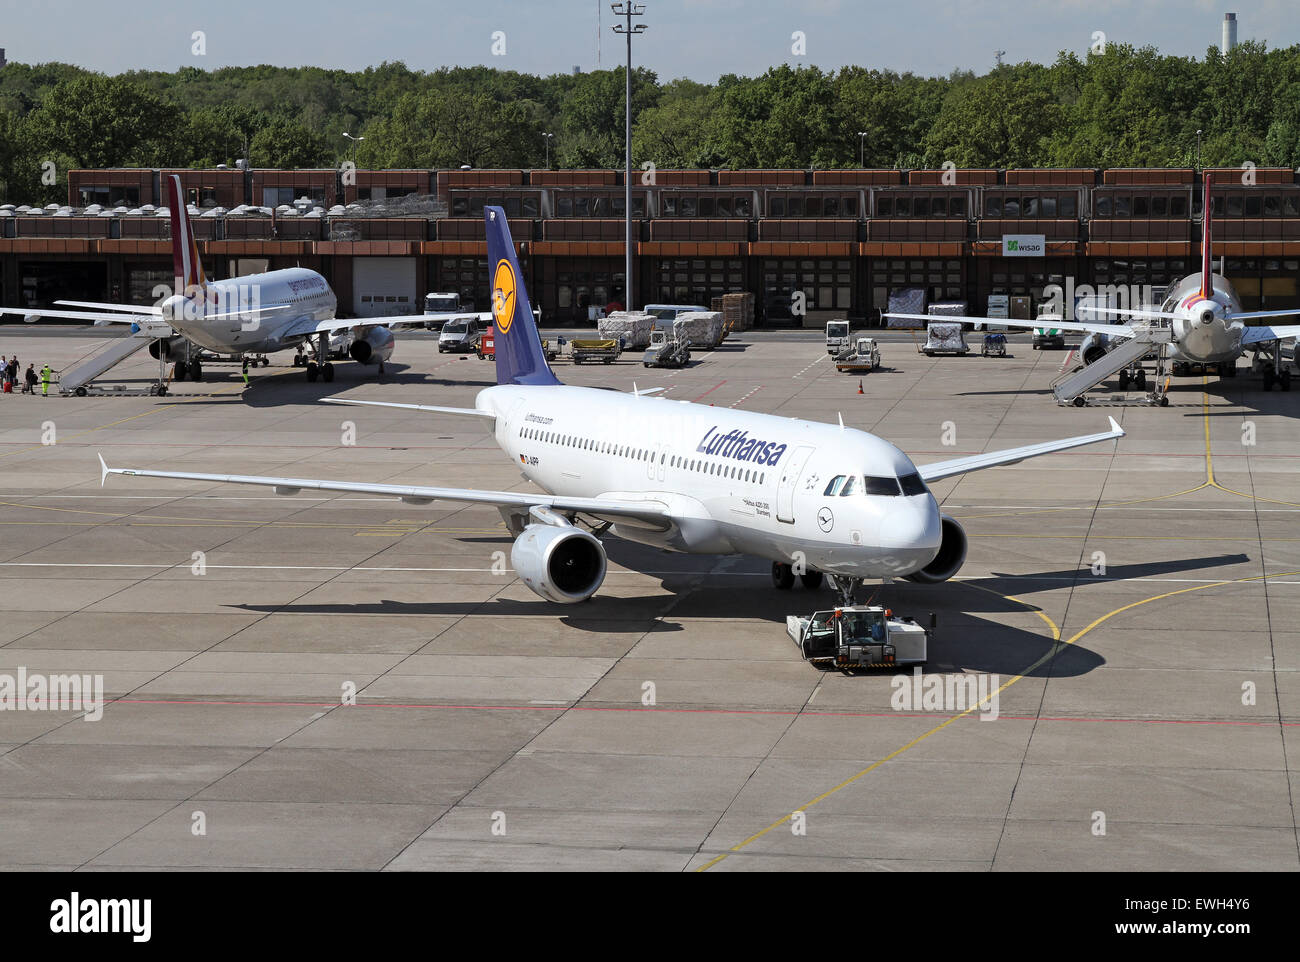 Berlin, Germany, Airbus A320, Lufthansa is pushed by a push-back vehicle Stock Photo